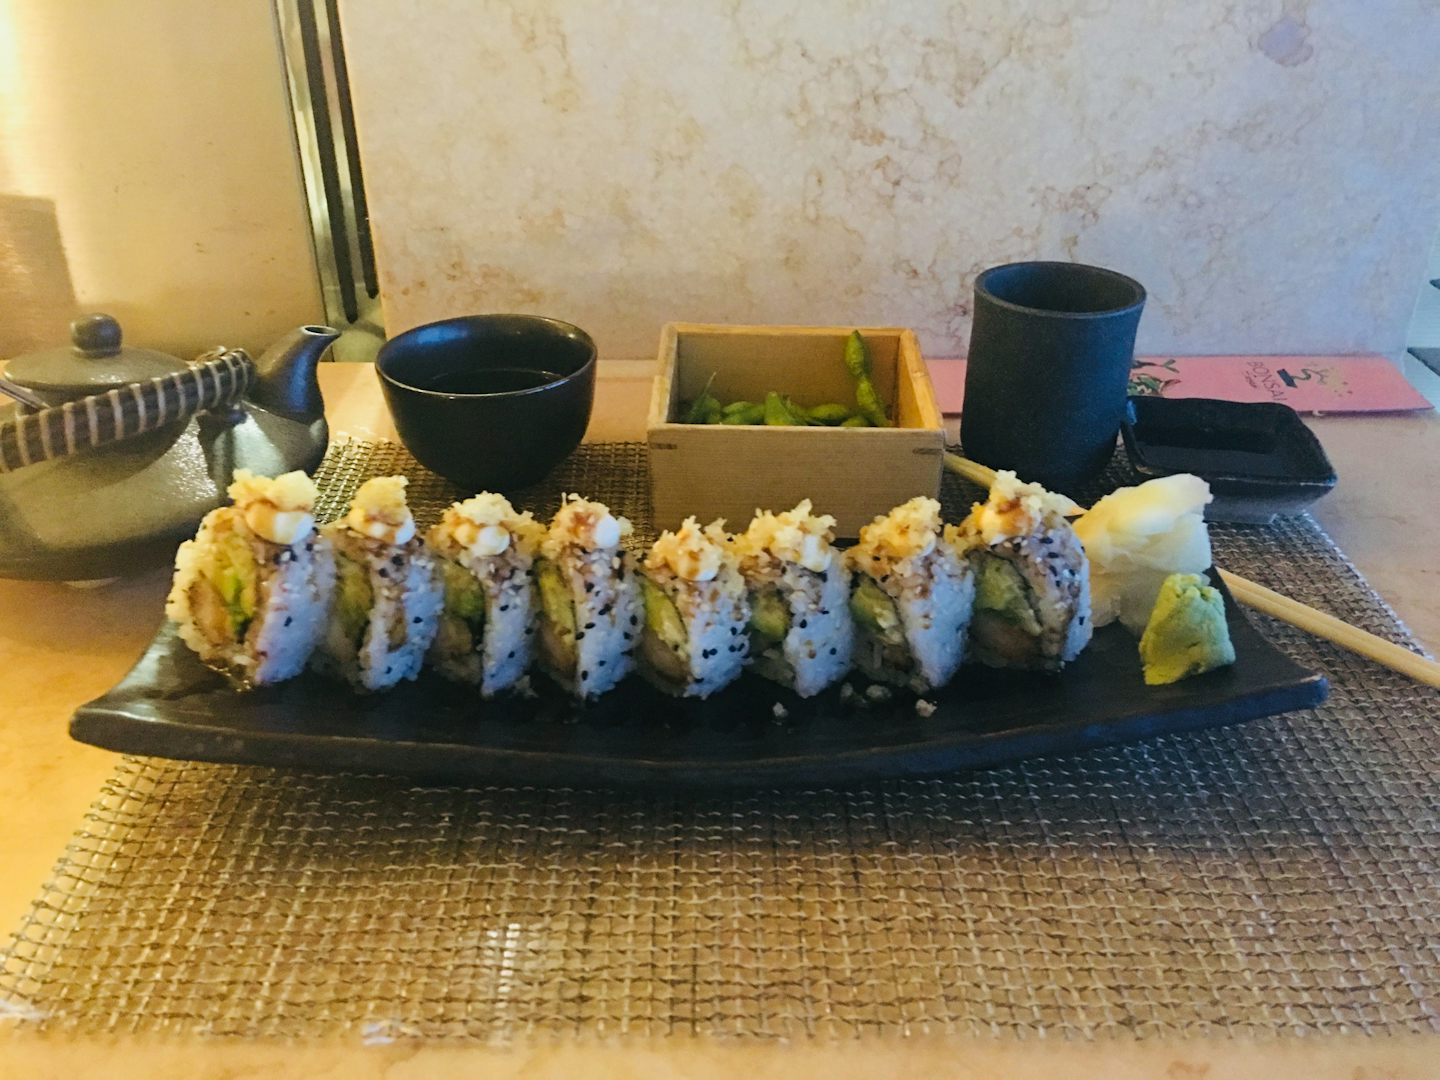 Loved this mouthwatering Sushi in the Sushi restaurant and bar.